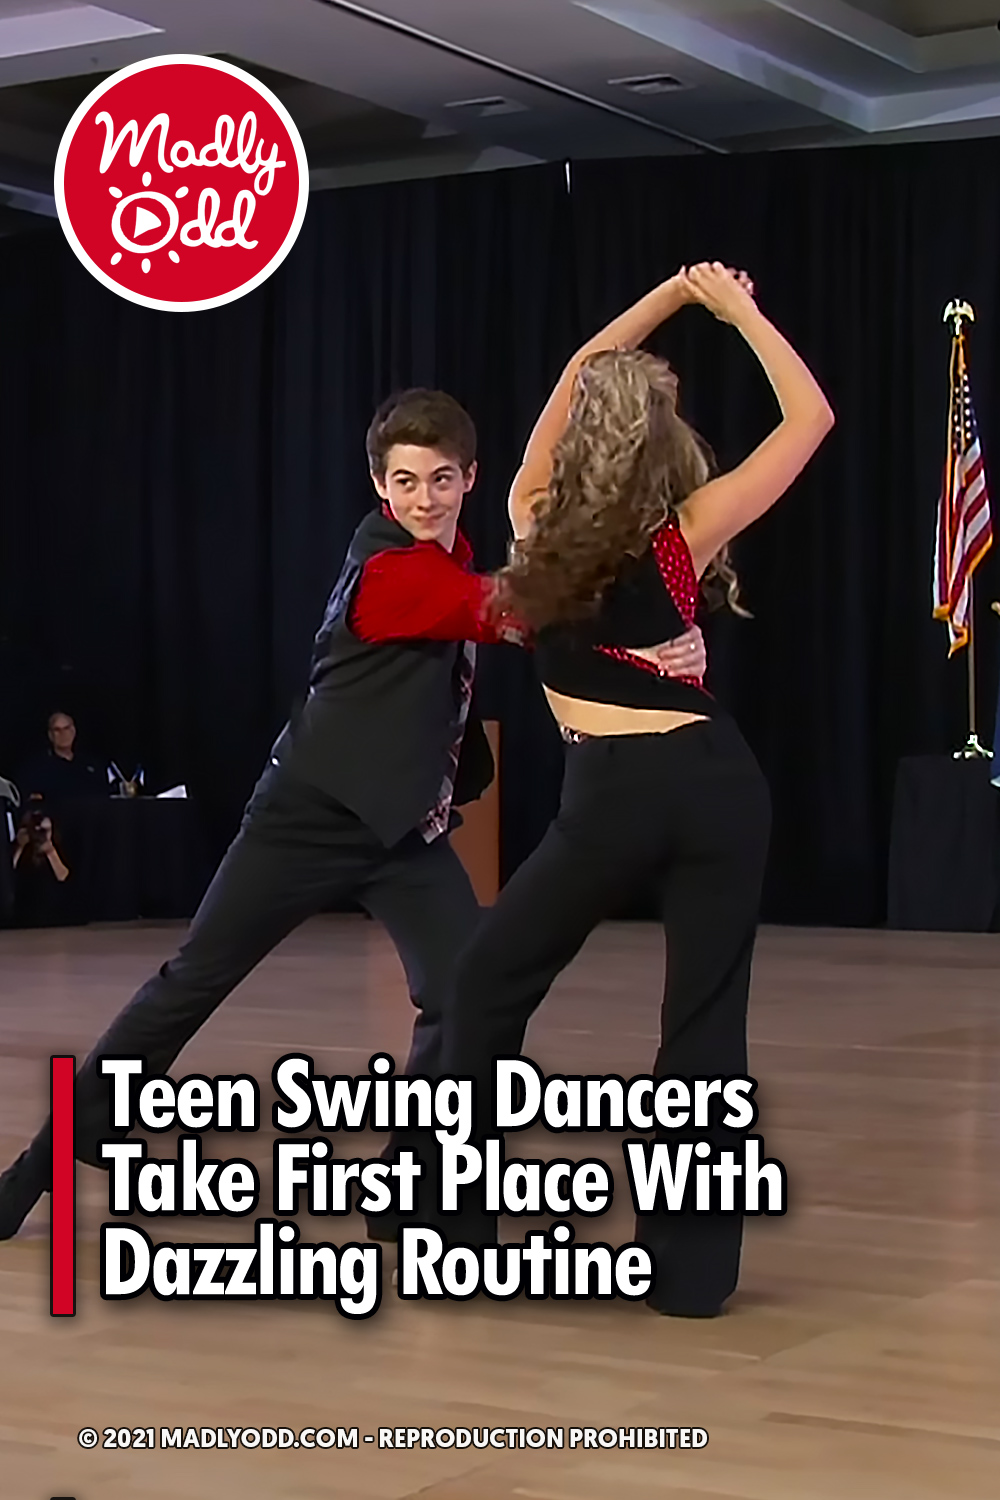 Teen Swing Dancers Take First Place With Dazzling Routine